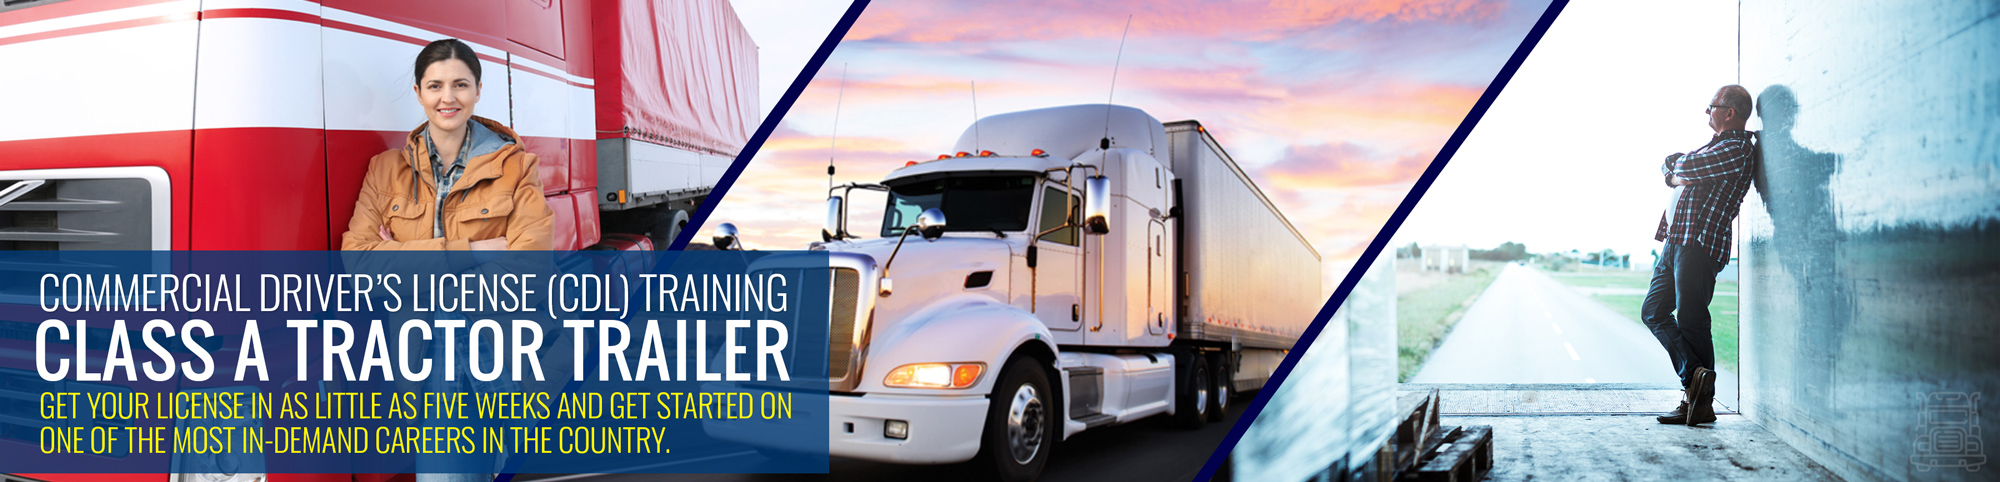 Commercial Driver’s License (CDL) Training: Class A Tractor Trailer Get your license in as little as five weeks and get started on one of the most in-demand careers in the country.